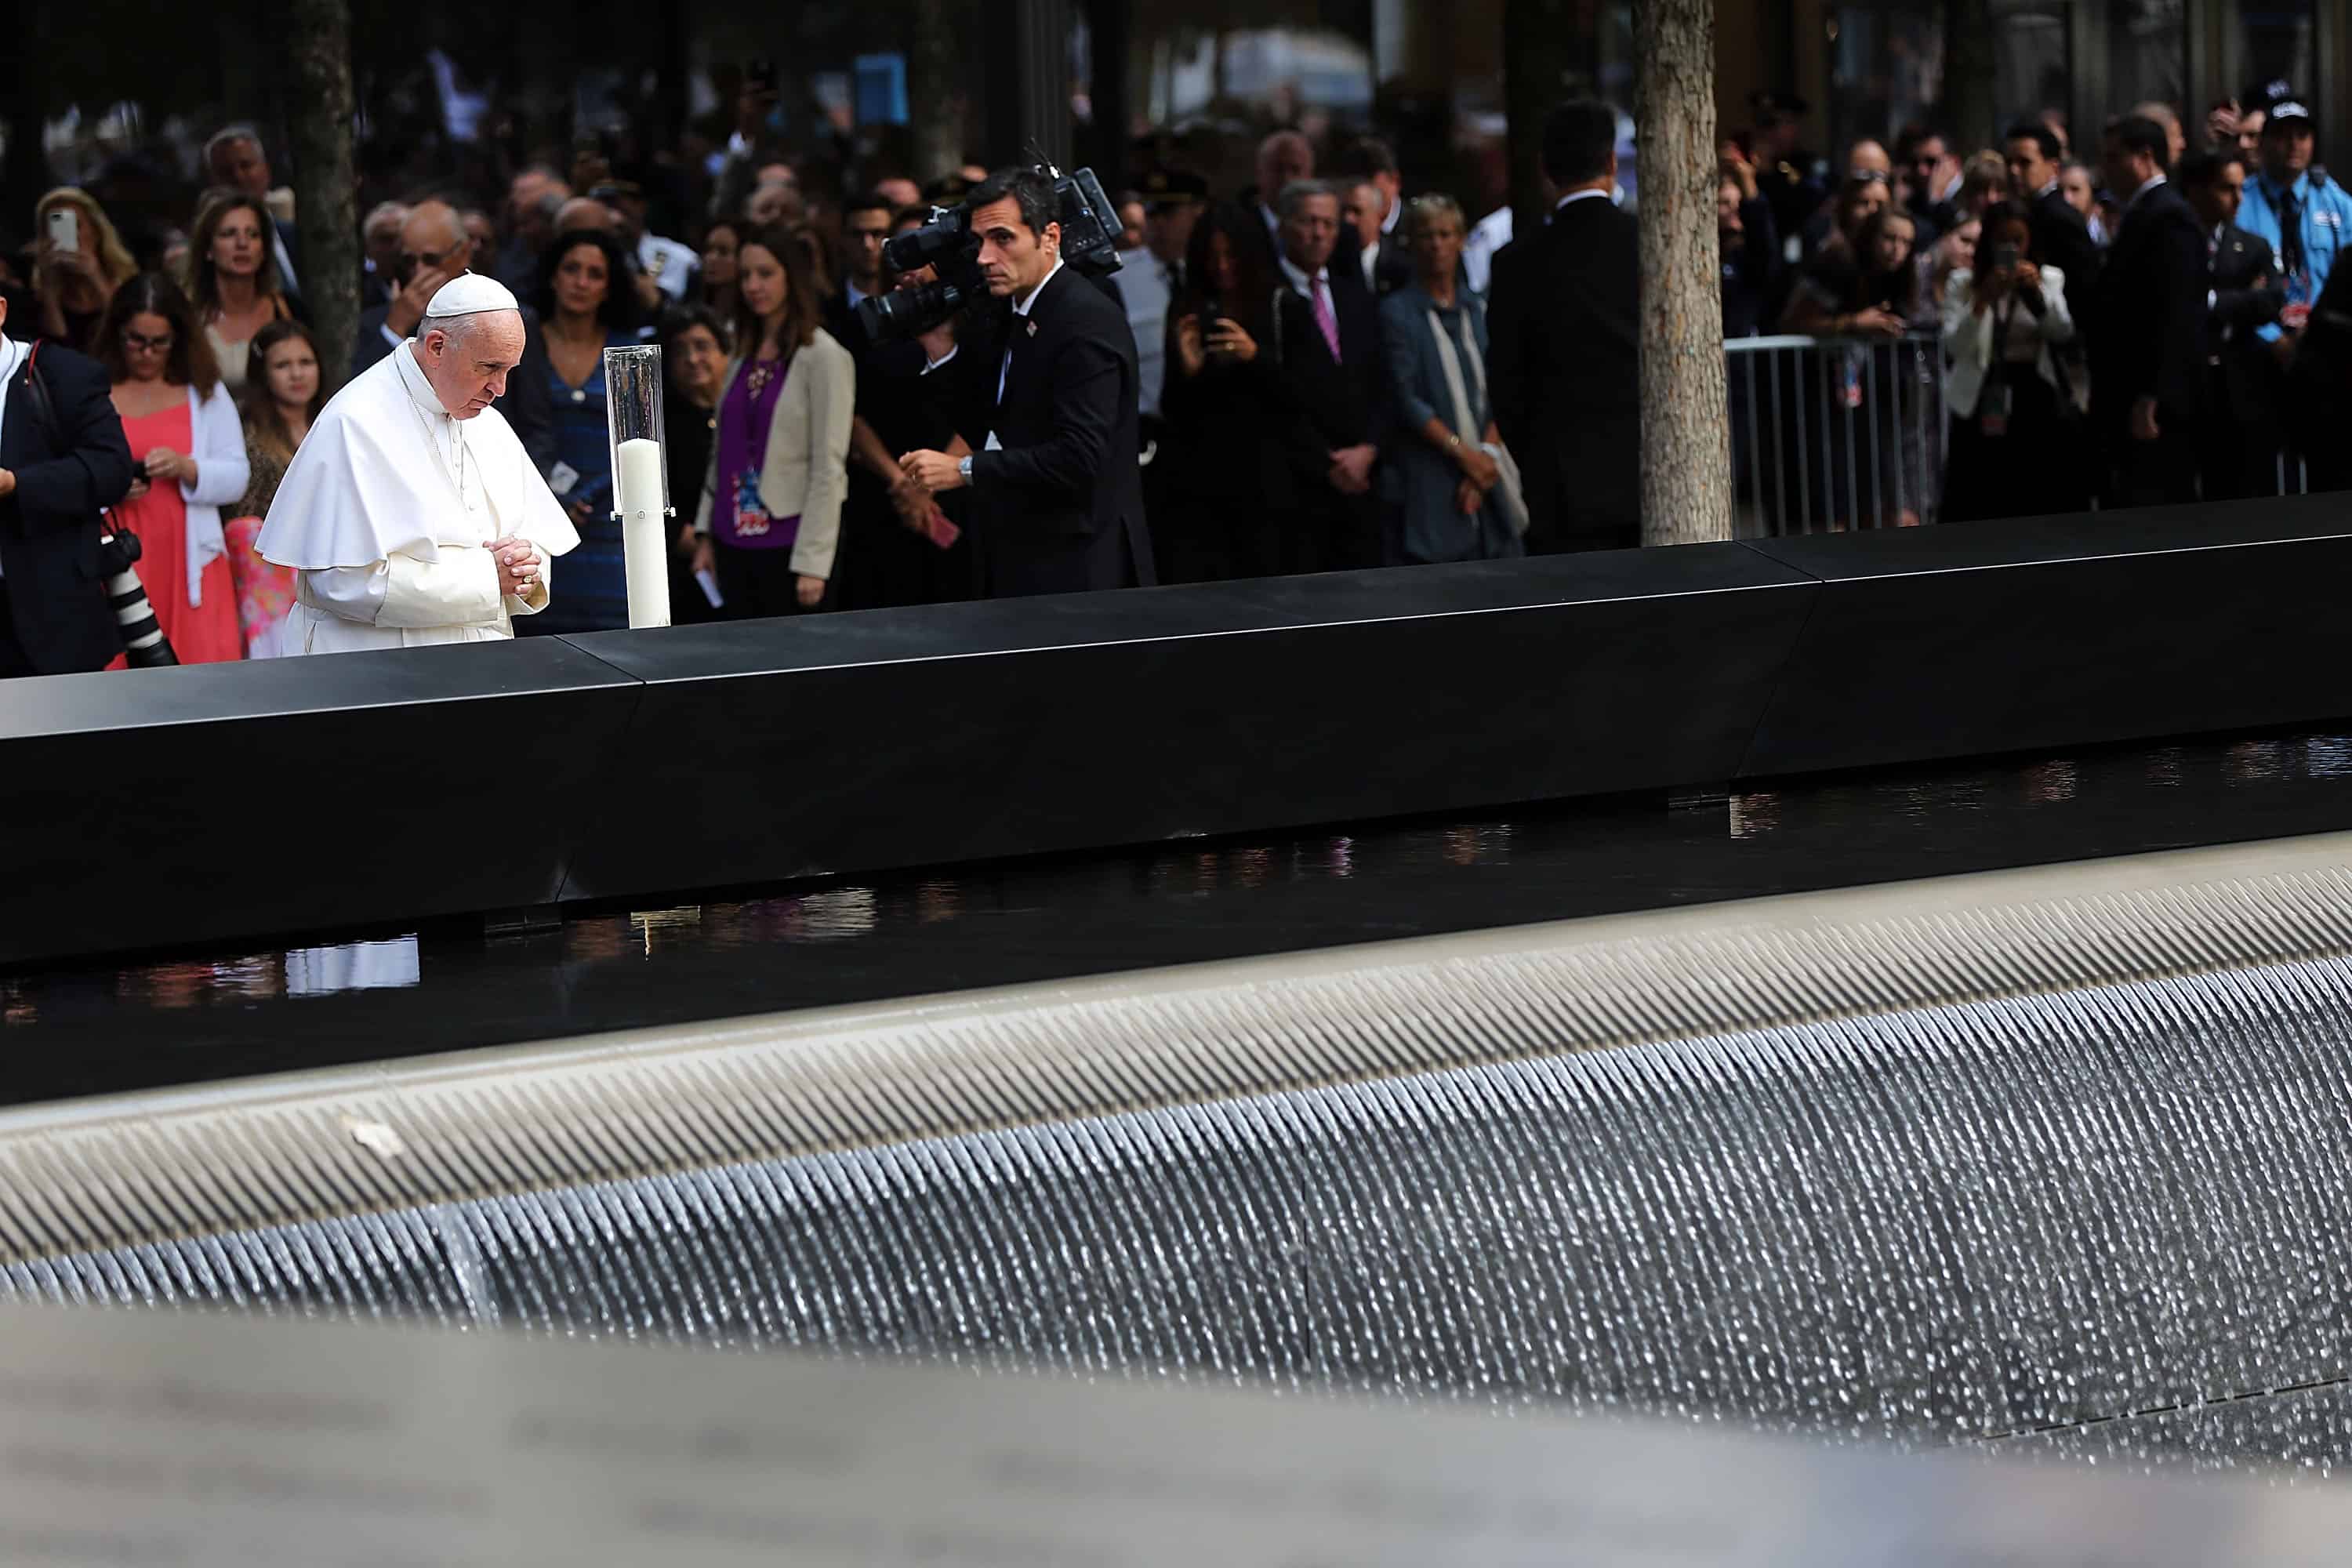 Pope Francis pauses during a visit to Ground Zero